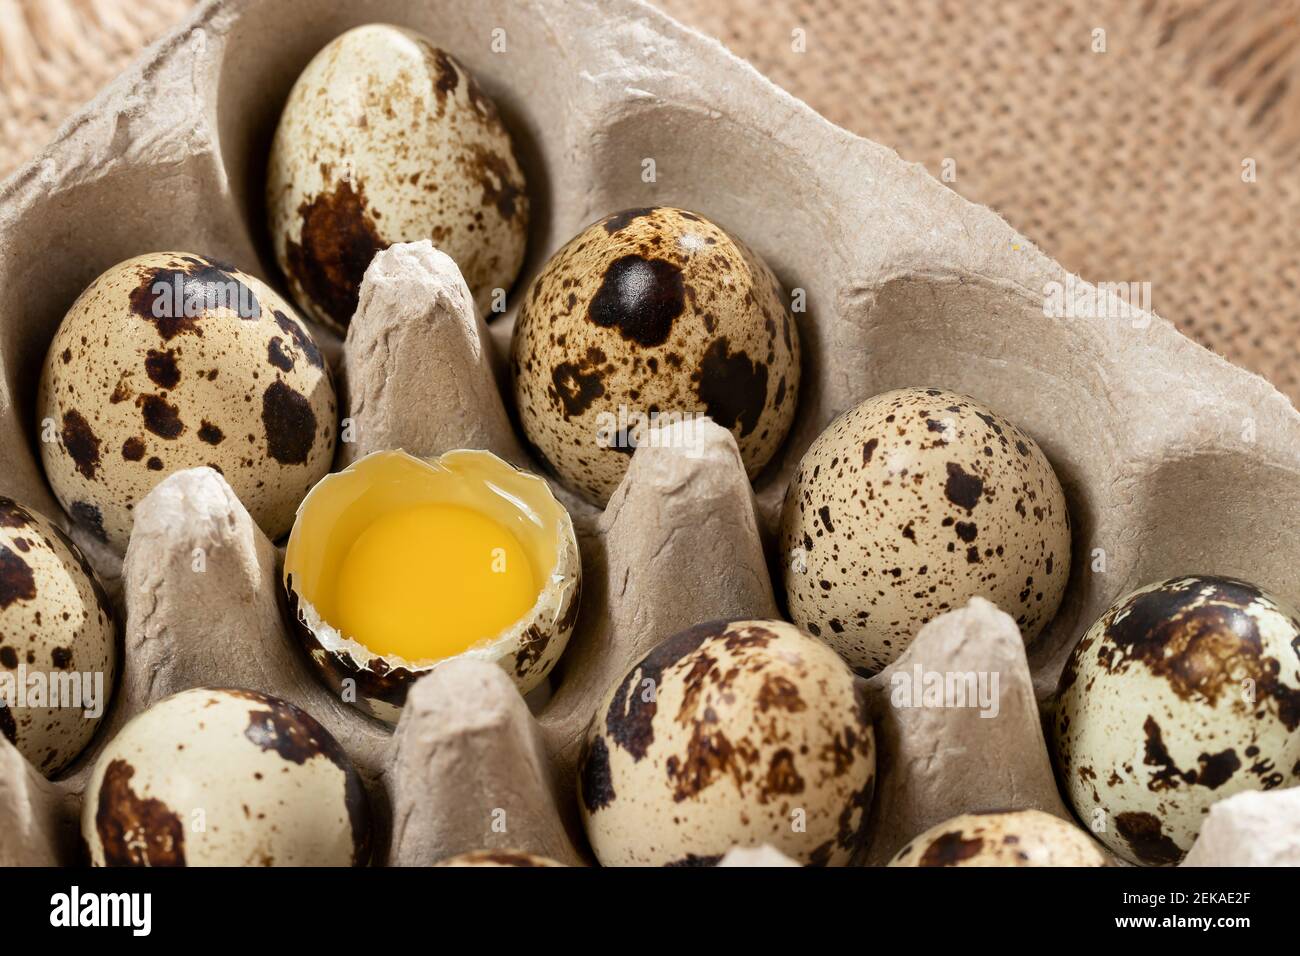 Quail eggs in cardboard packaging on a wooden table close-up. Stock Photo